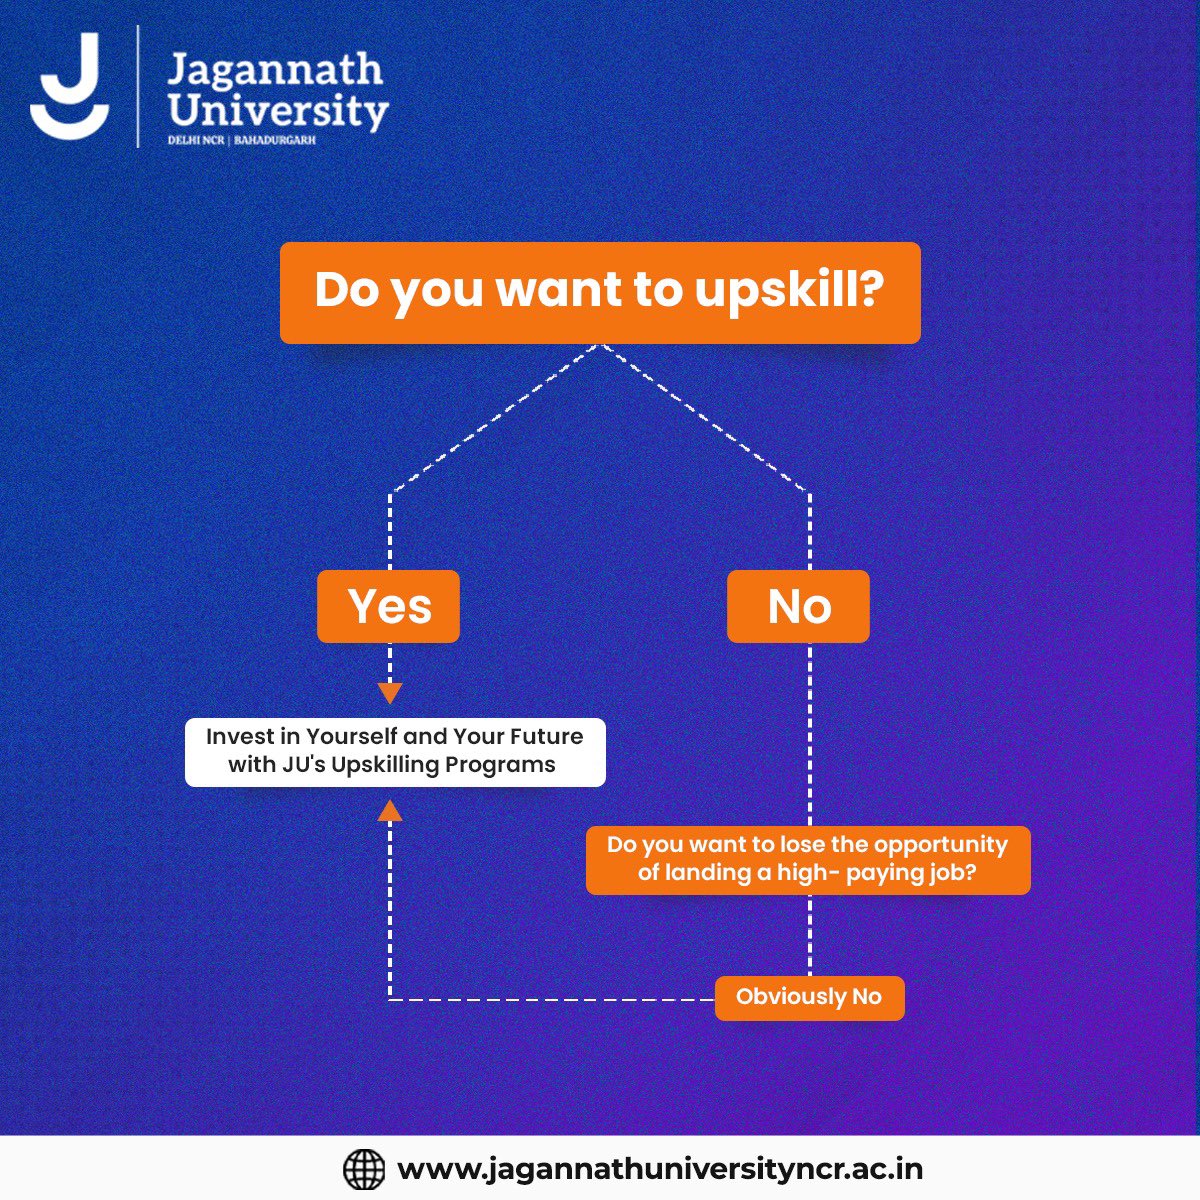 Choose JU's Upskilling Programs and Invest in Your Future Today.
Don't Miss Out on High-Paying Job Opportunities, Enrol Now!

#InvestInYourFuture #UpskillingPrograms #ChooseJU #EnrolNow #HighPayingJobs #OpportunityKnocks #InvestInYourself #FutureReady #NCR #Bahadurgarh #JU